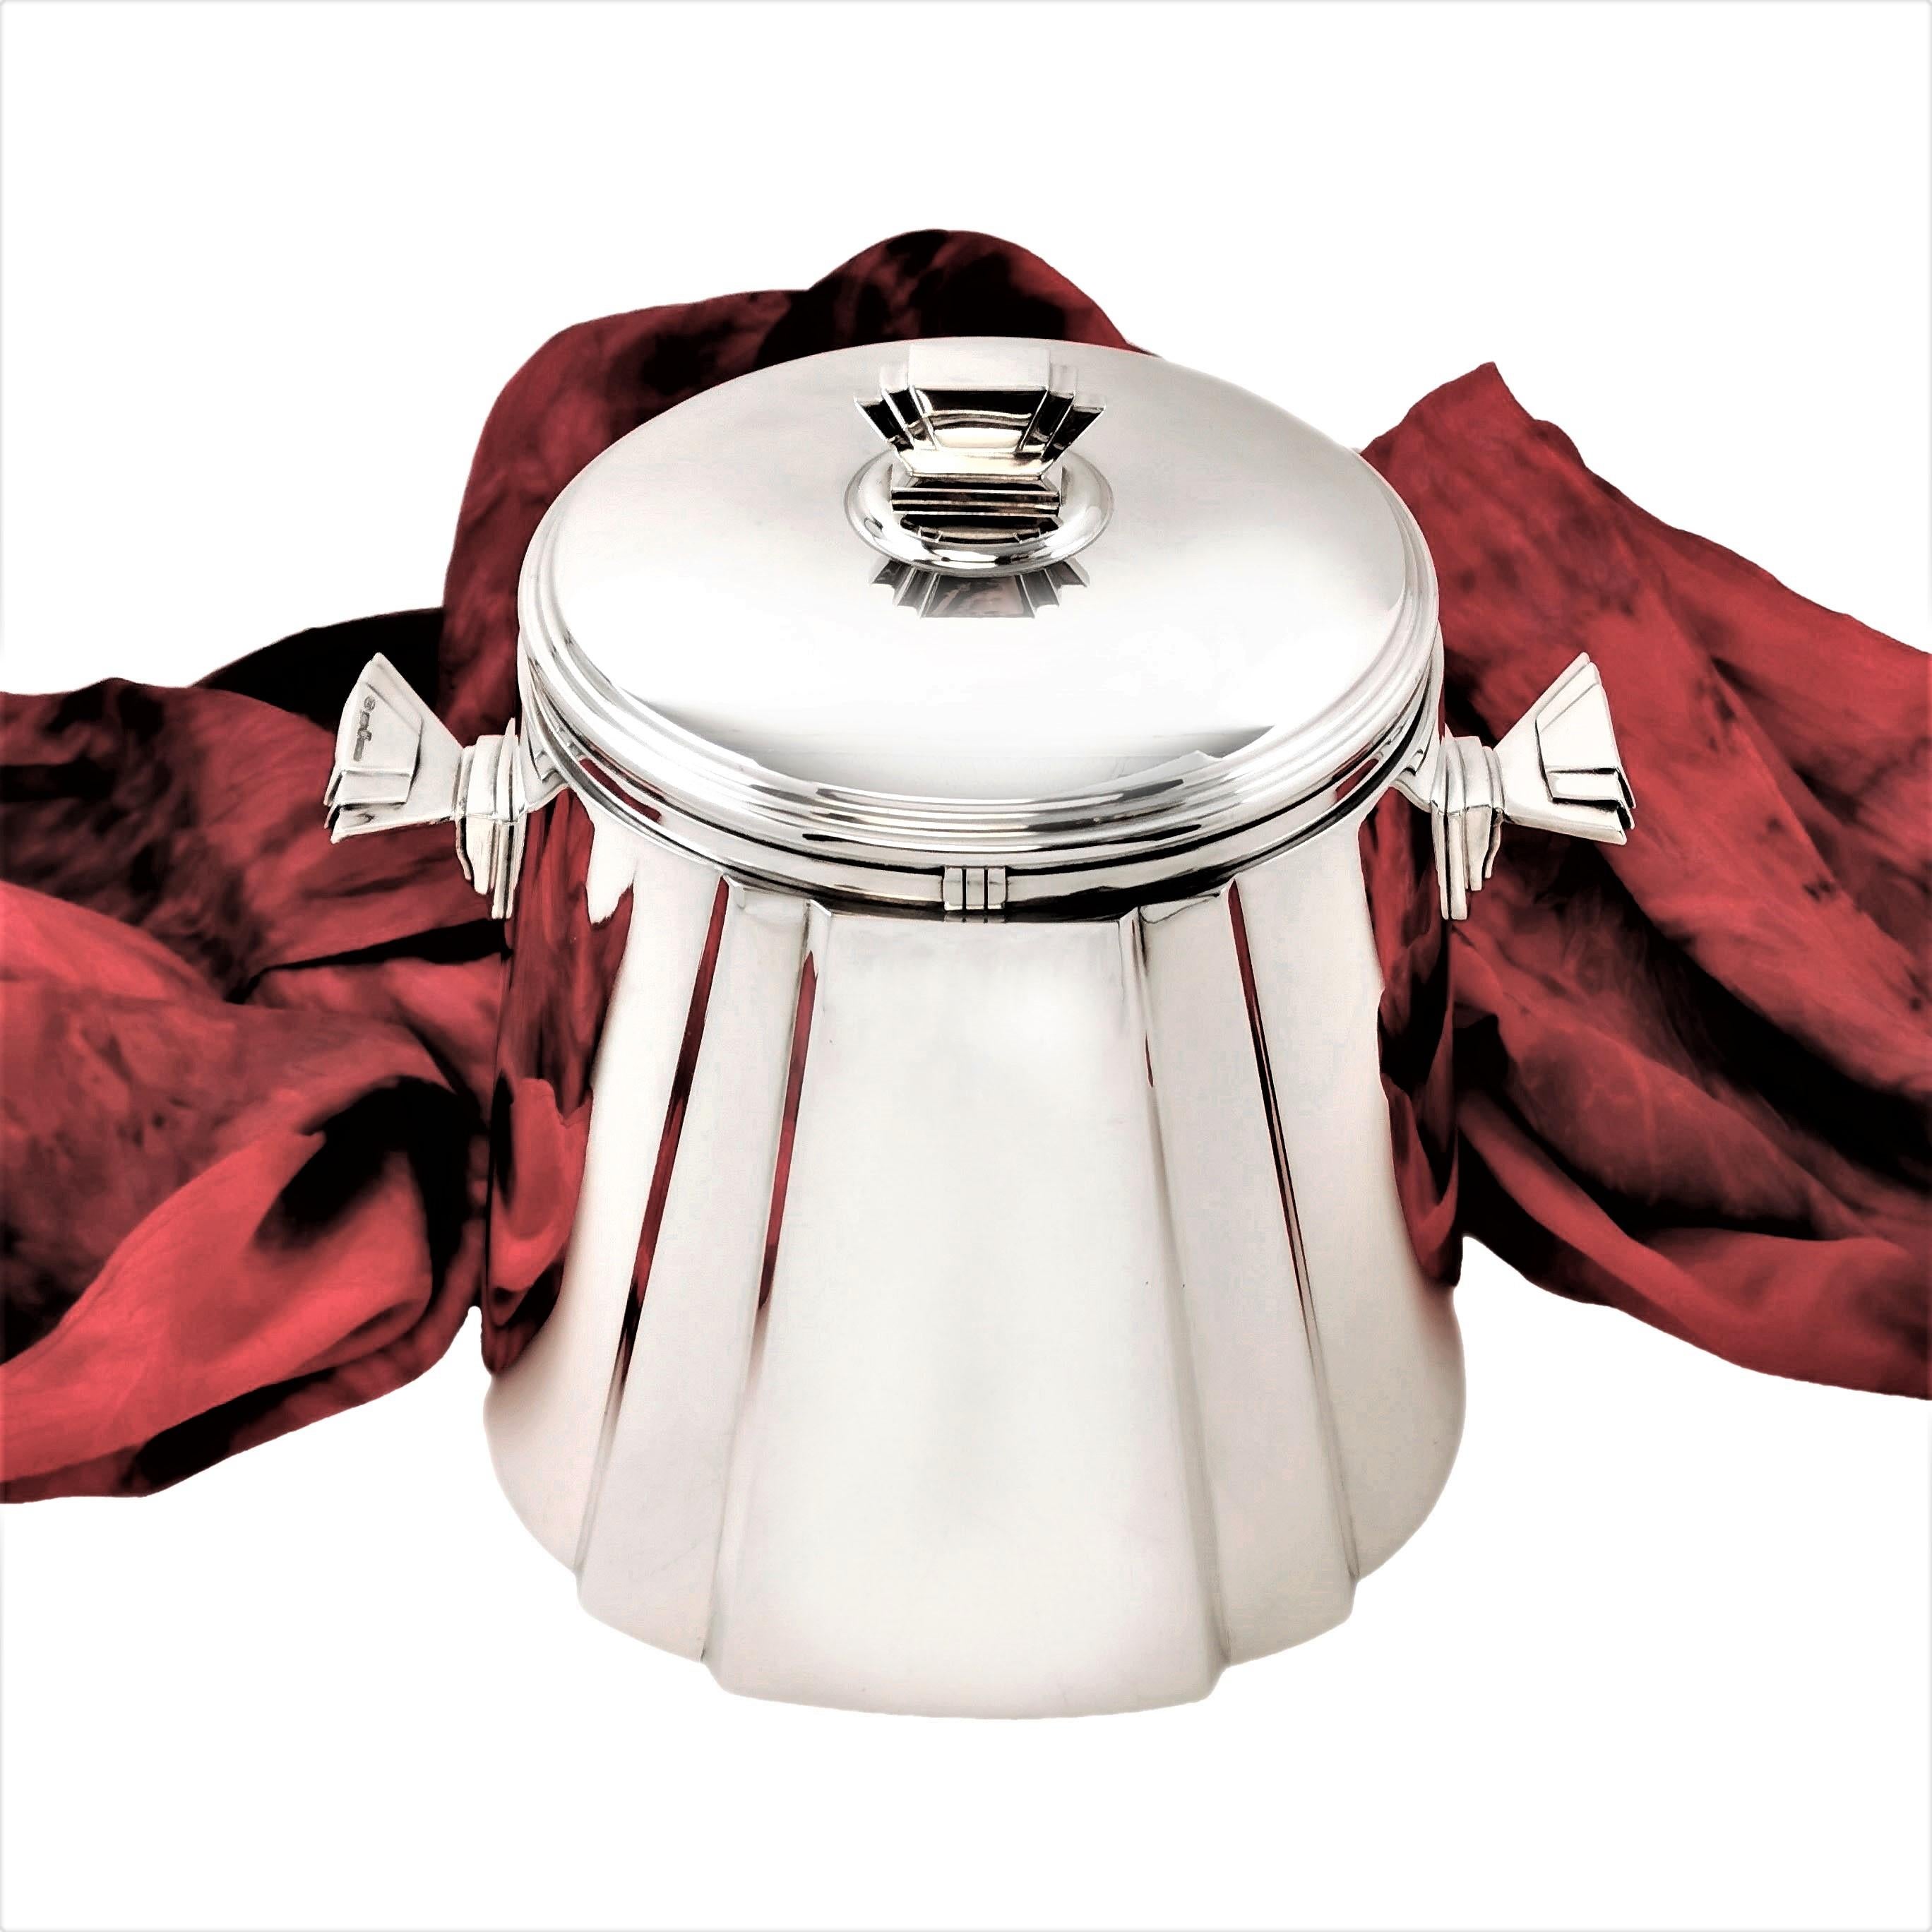 An impressive vintage Italian Art Deco style Ice Bucket. This lidded Ice Bucket is designed to also be suitable for use as a Wine or Champagne Cooler without the lid. The mid-century cooler has a white liner for increased insulation. The cooler has